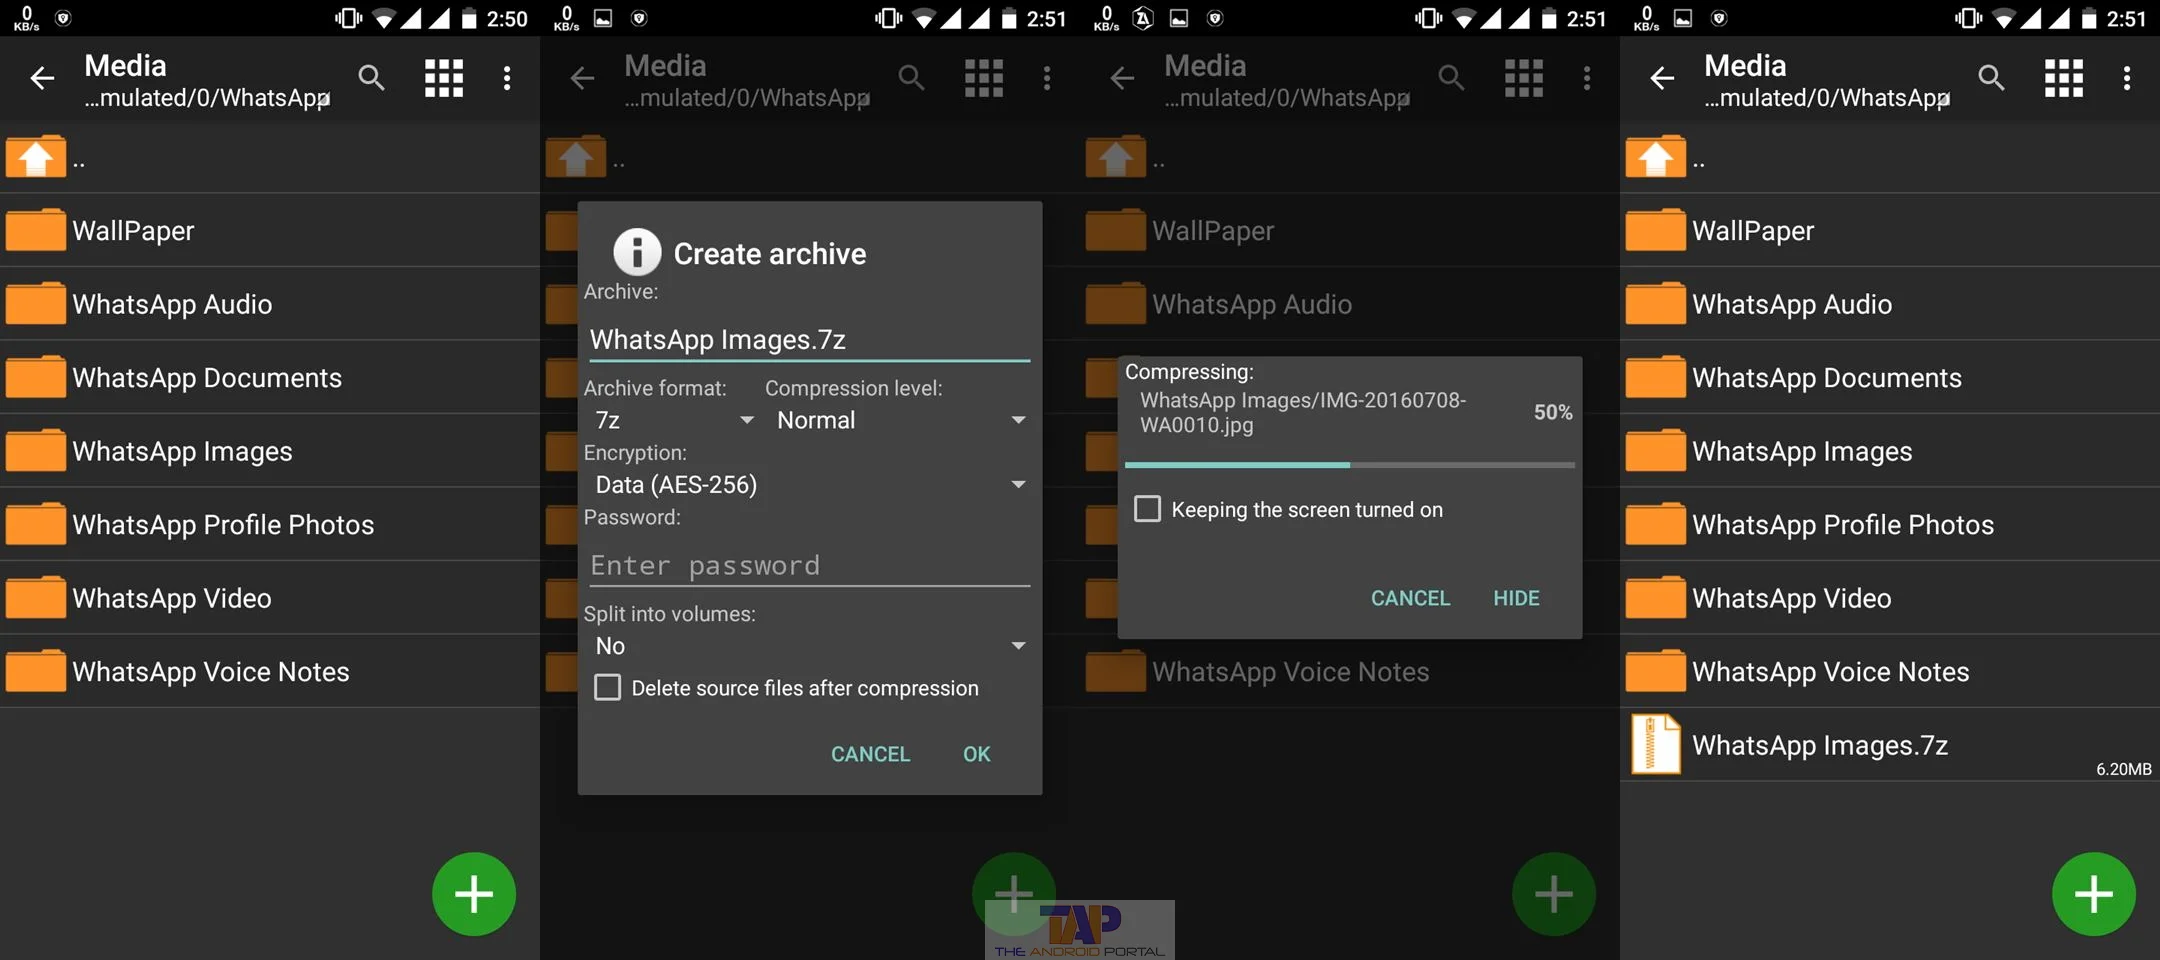 How to Unzip Files in Android